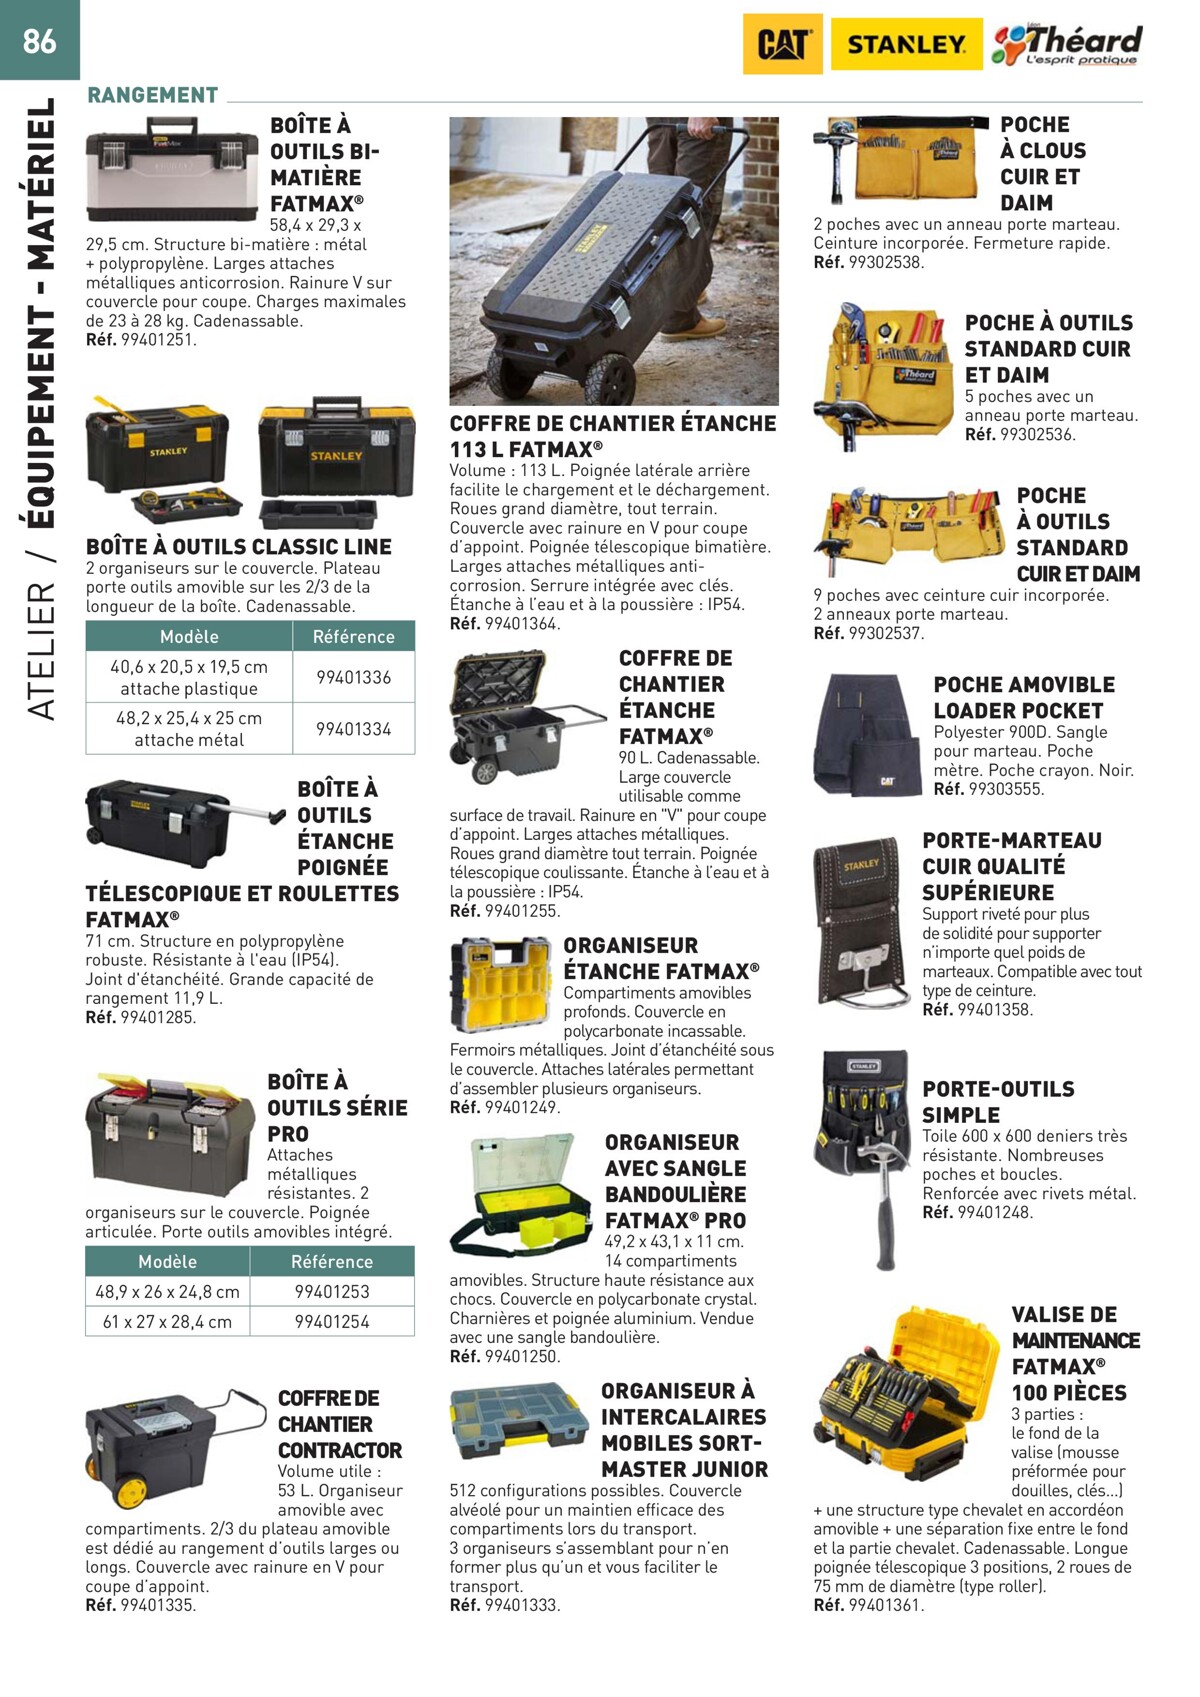 Catalogue Special Outillage et equipments, page 00086